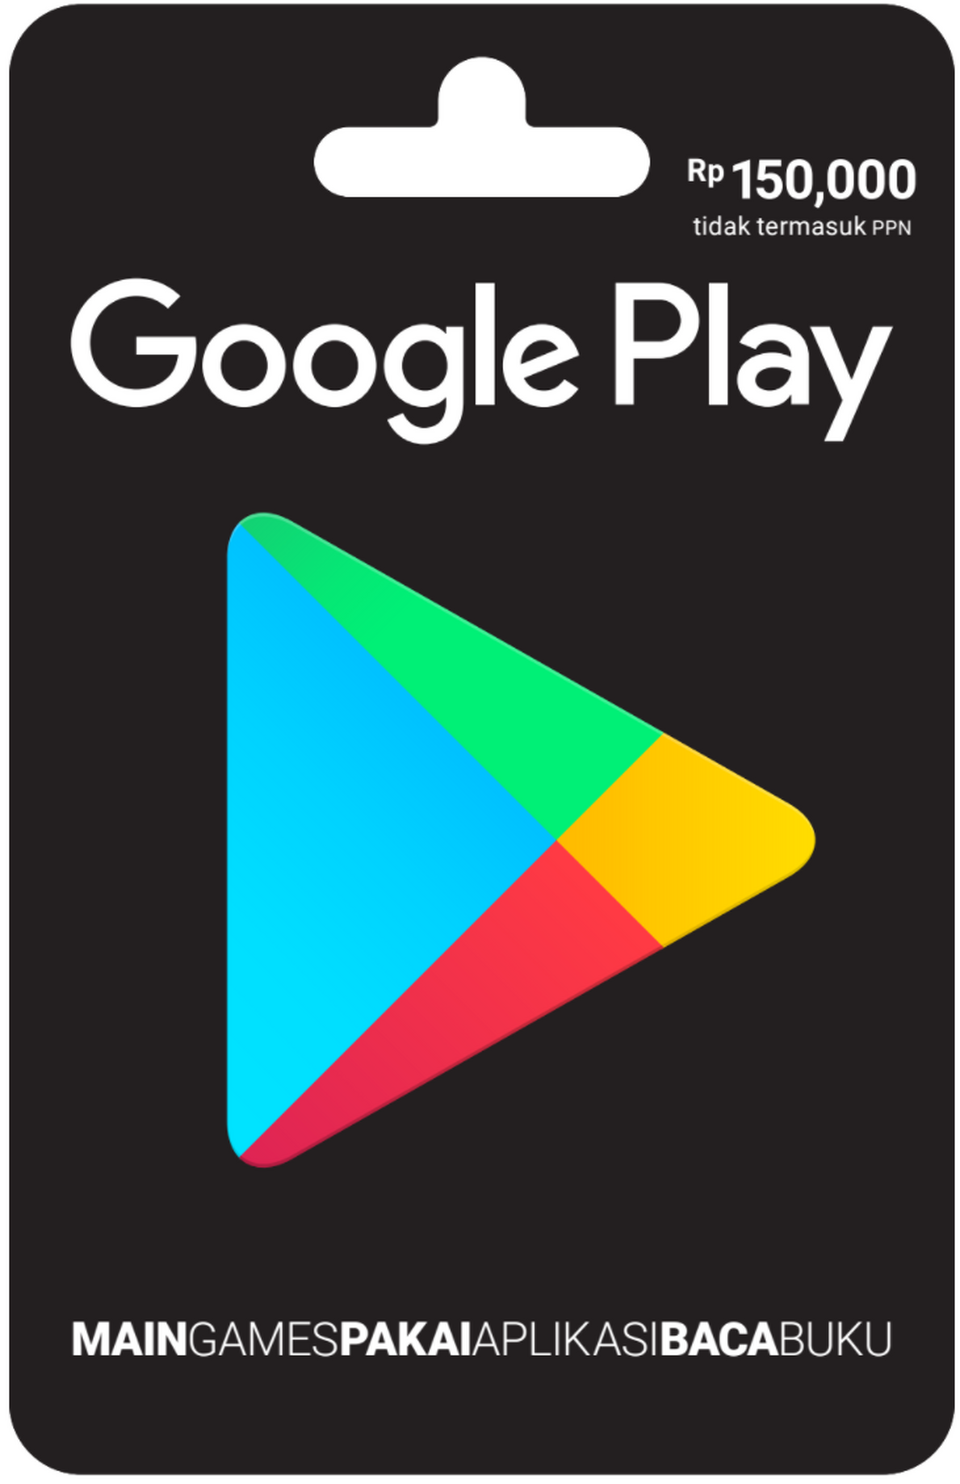 Google will start selling gift cards at Indomaret minimarkets in the greater Jakarta area this week, allowing Android users to redeem the new products through its online marketplace. (Photo courtesy of Google)